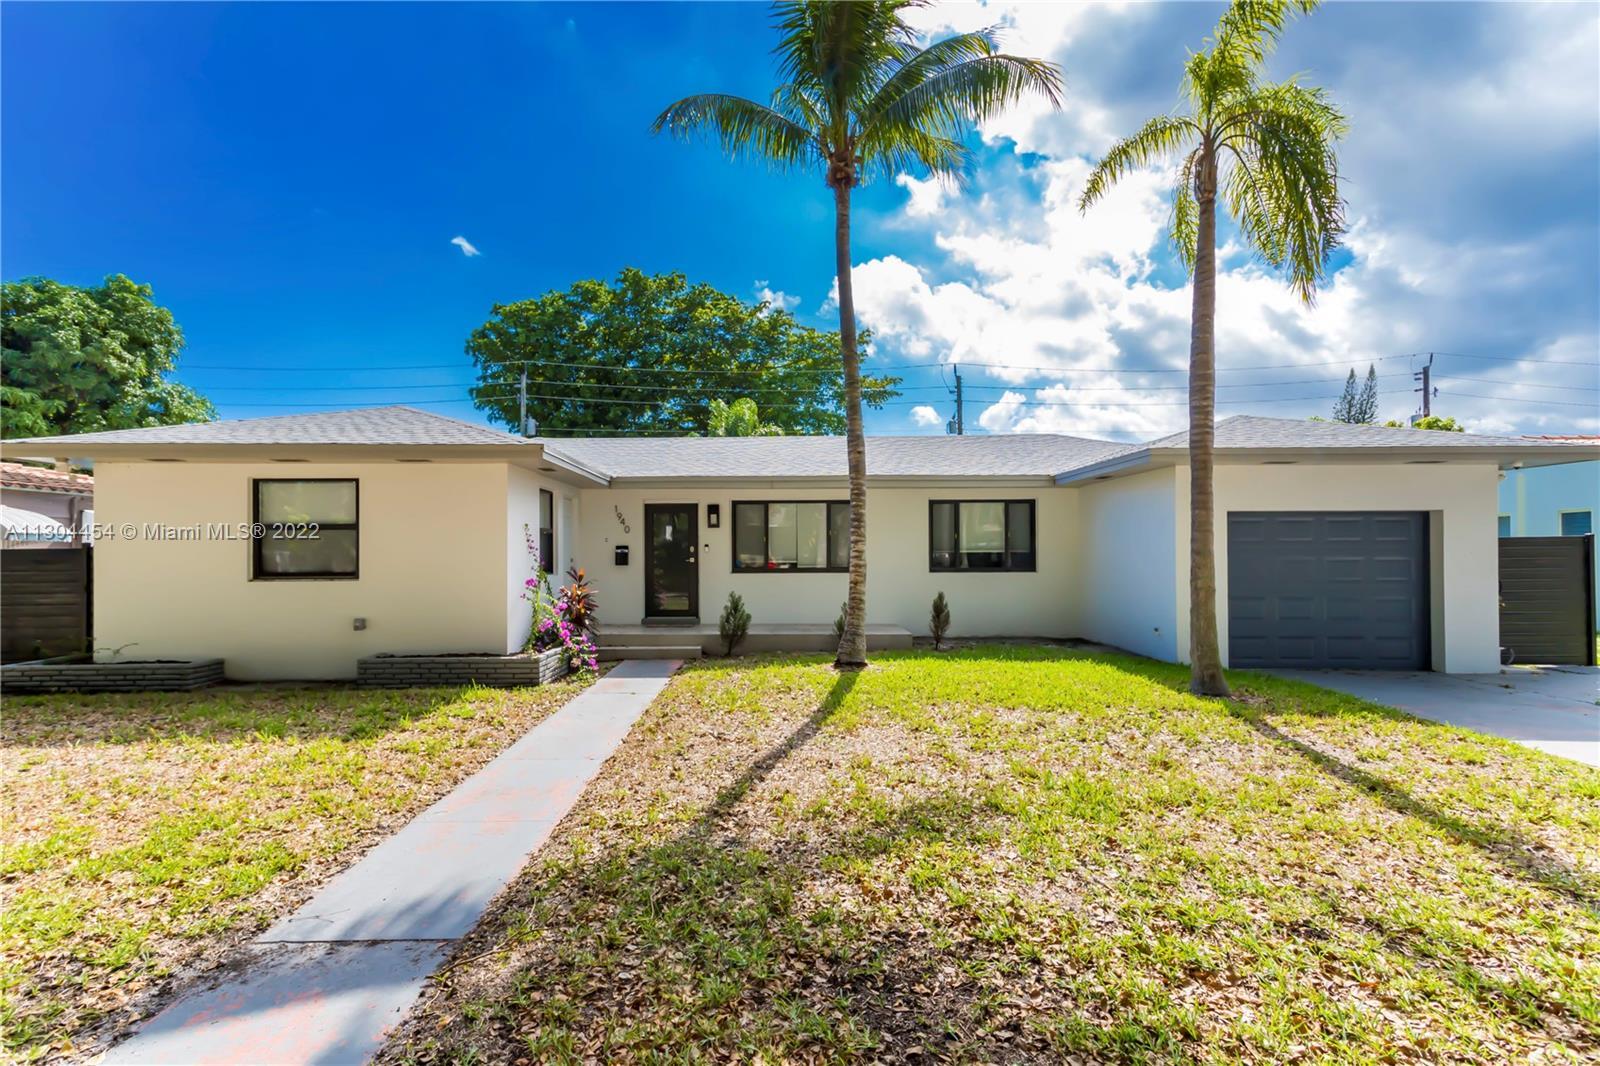 Stunning fully updated 4 bedroom 3 bath home in Hollywood just minutes from Hollywood Beach! Endless